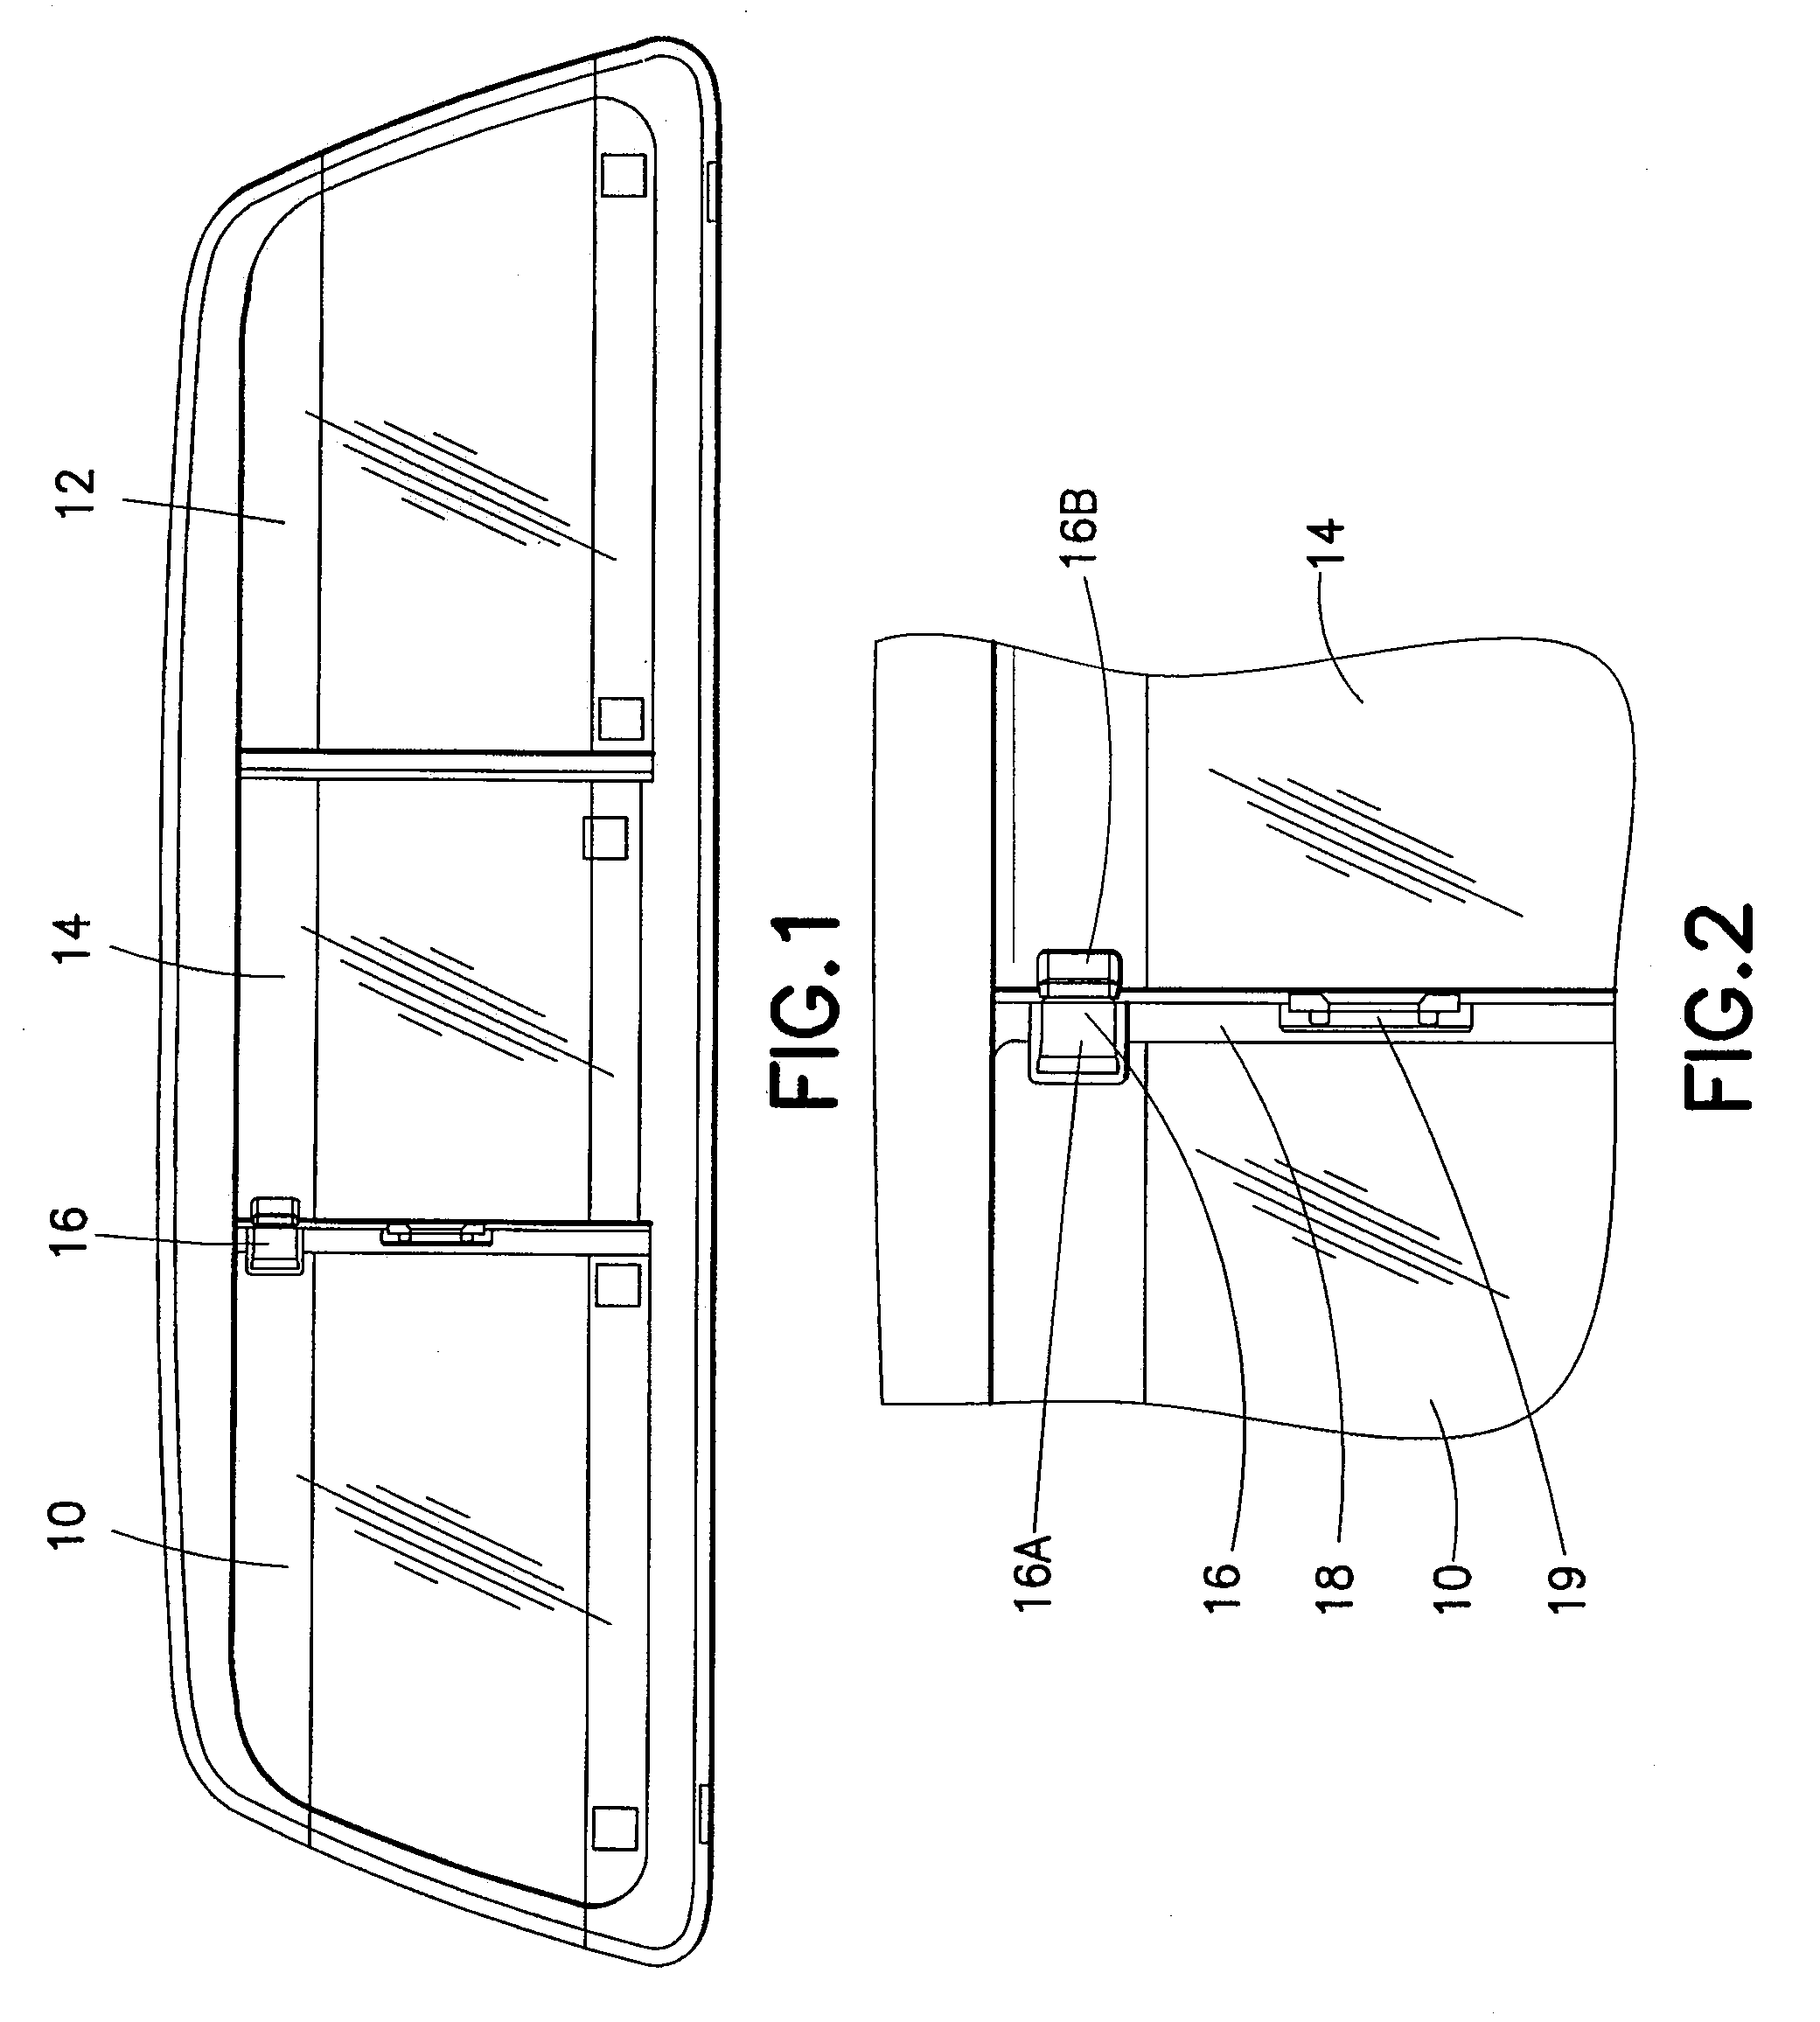 Sliding window magnetic electrical connector